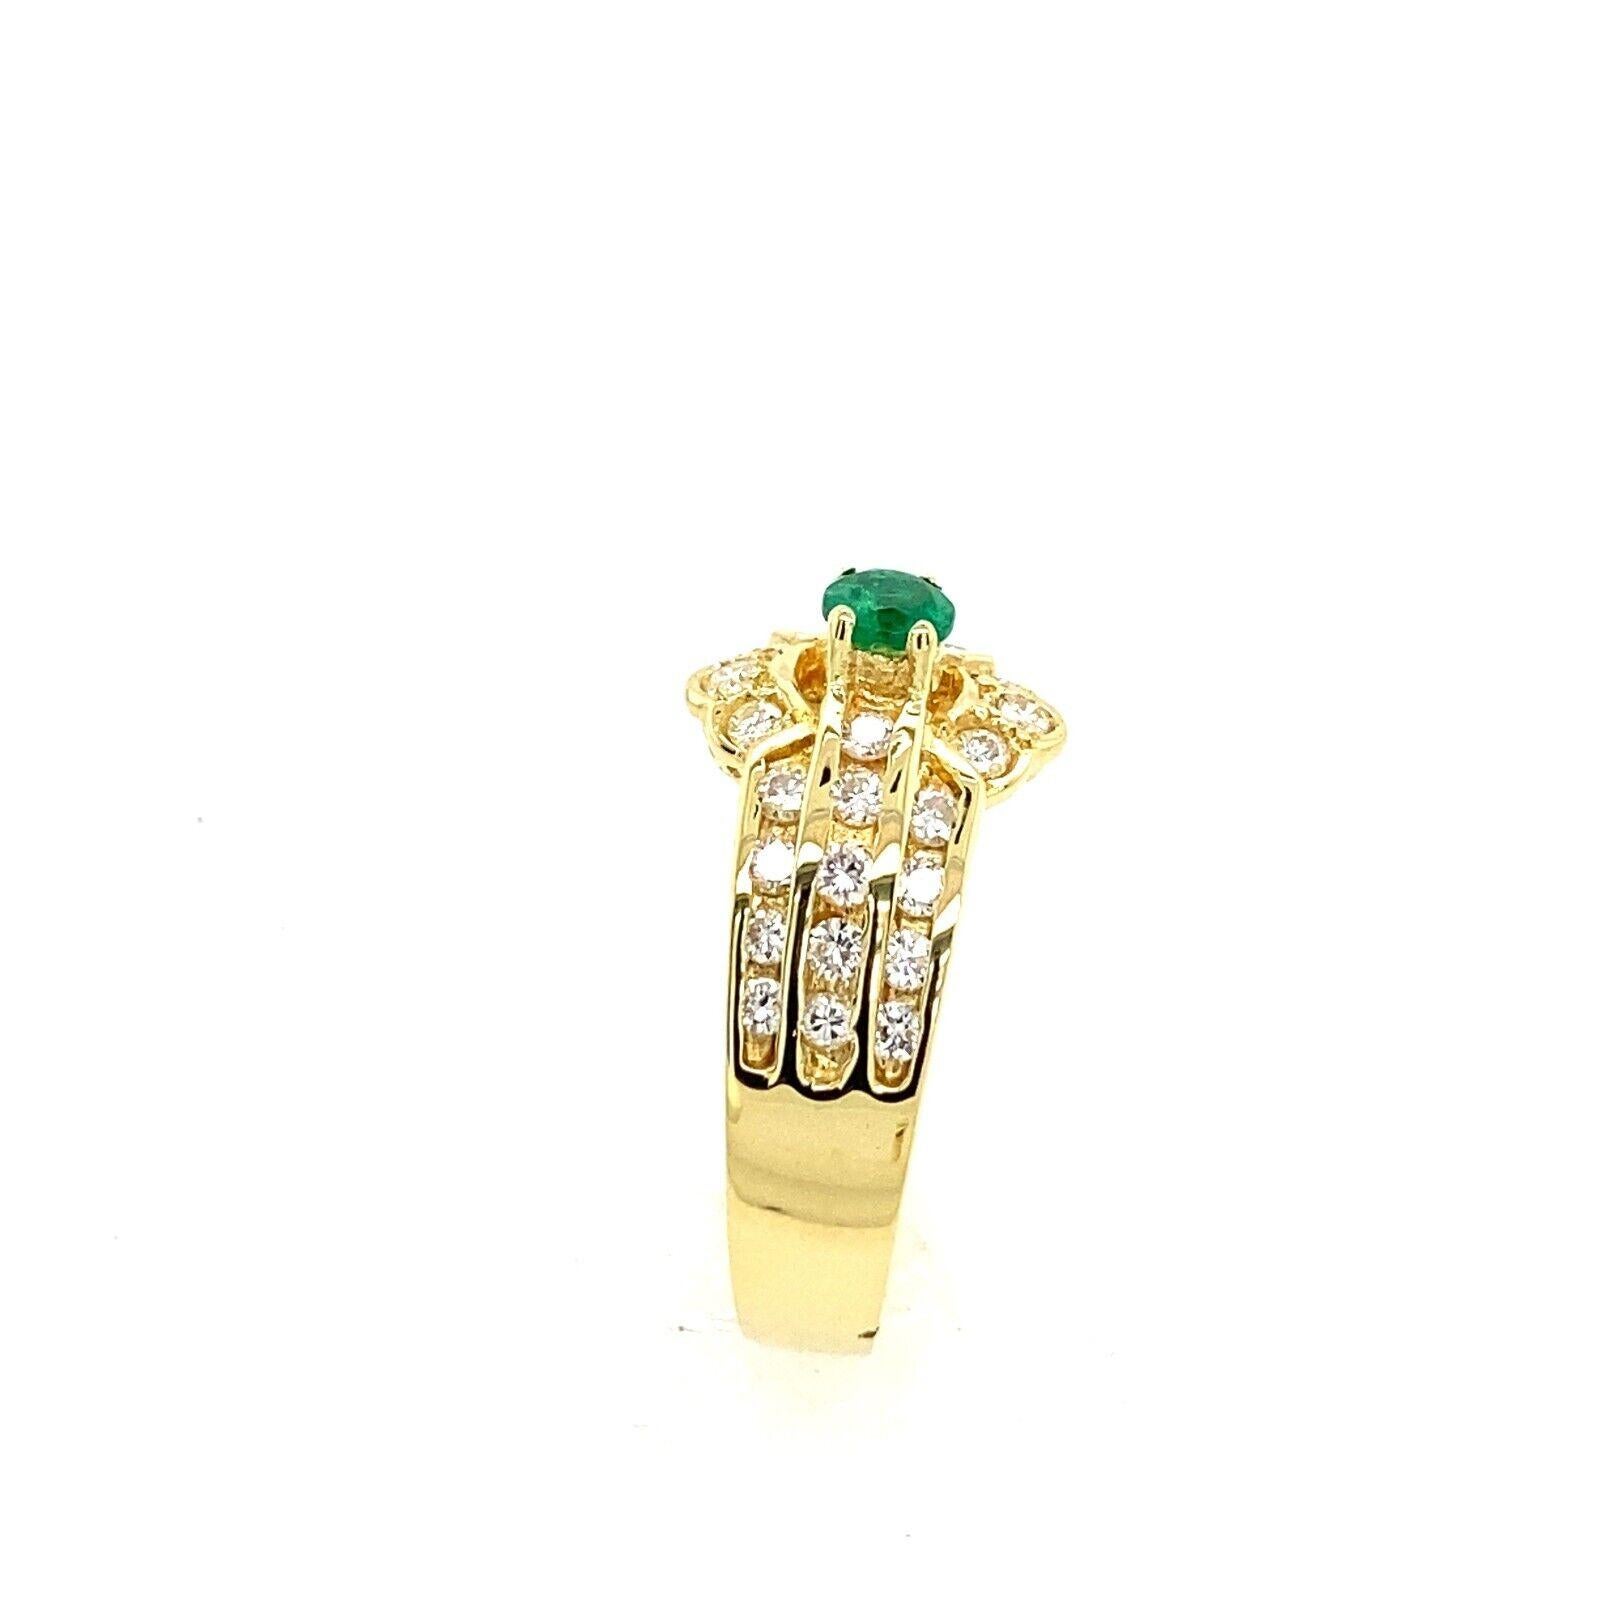 This gorgeous 18ct Yellow Gold Emerald ring is set with 0.40ct natural Round Diamonds.
The Emerald is a rich green, the Diamonds complement the Emerald, and together they symbolize the eternal love. (Tested as 18ct Gold)

Additional